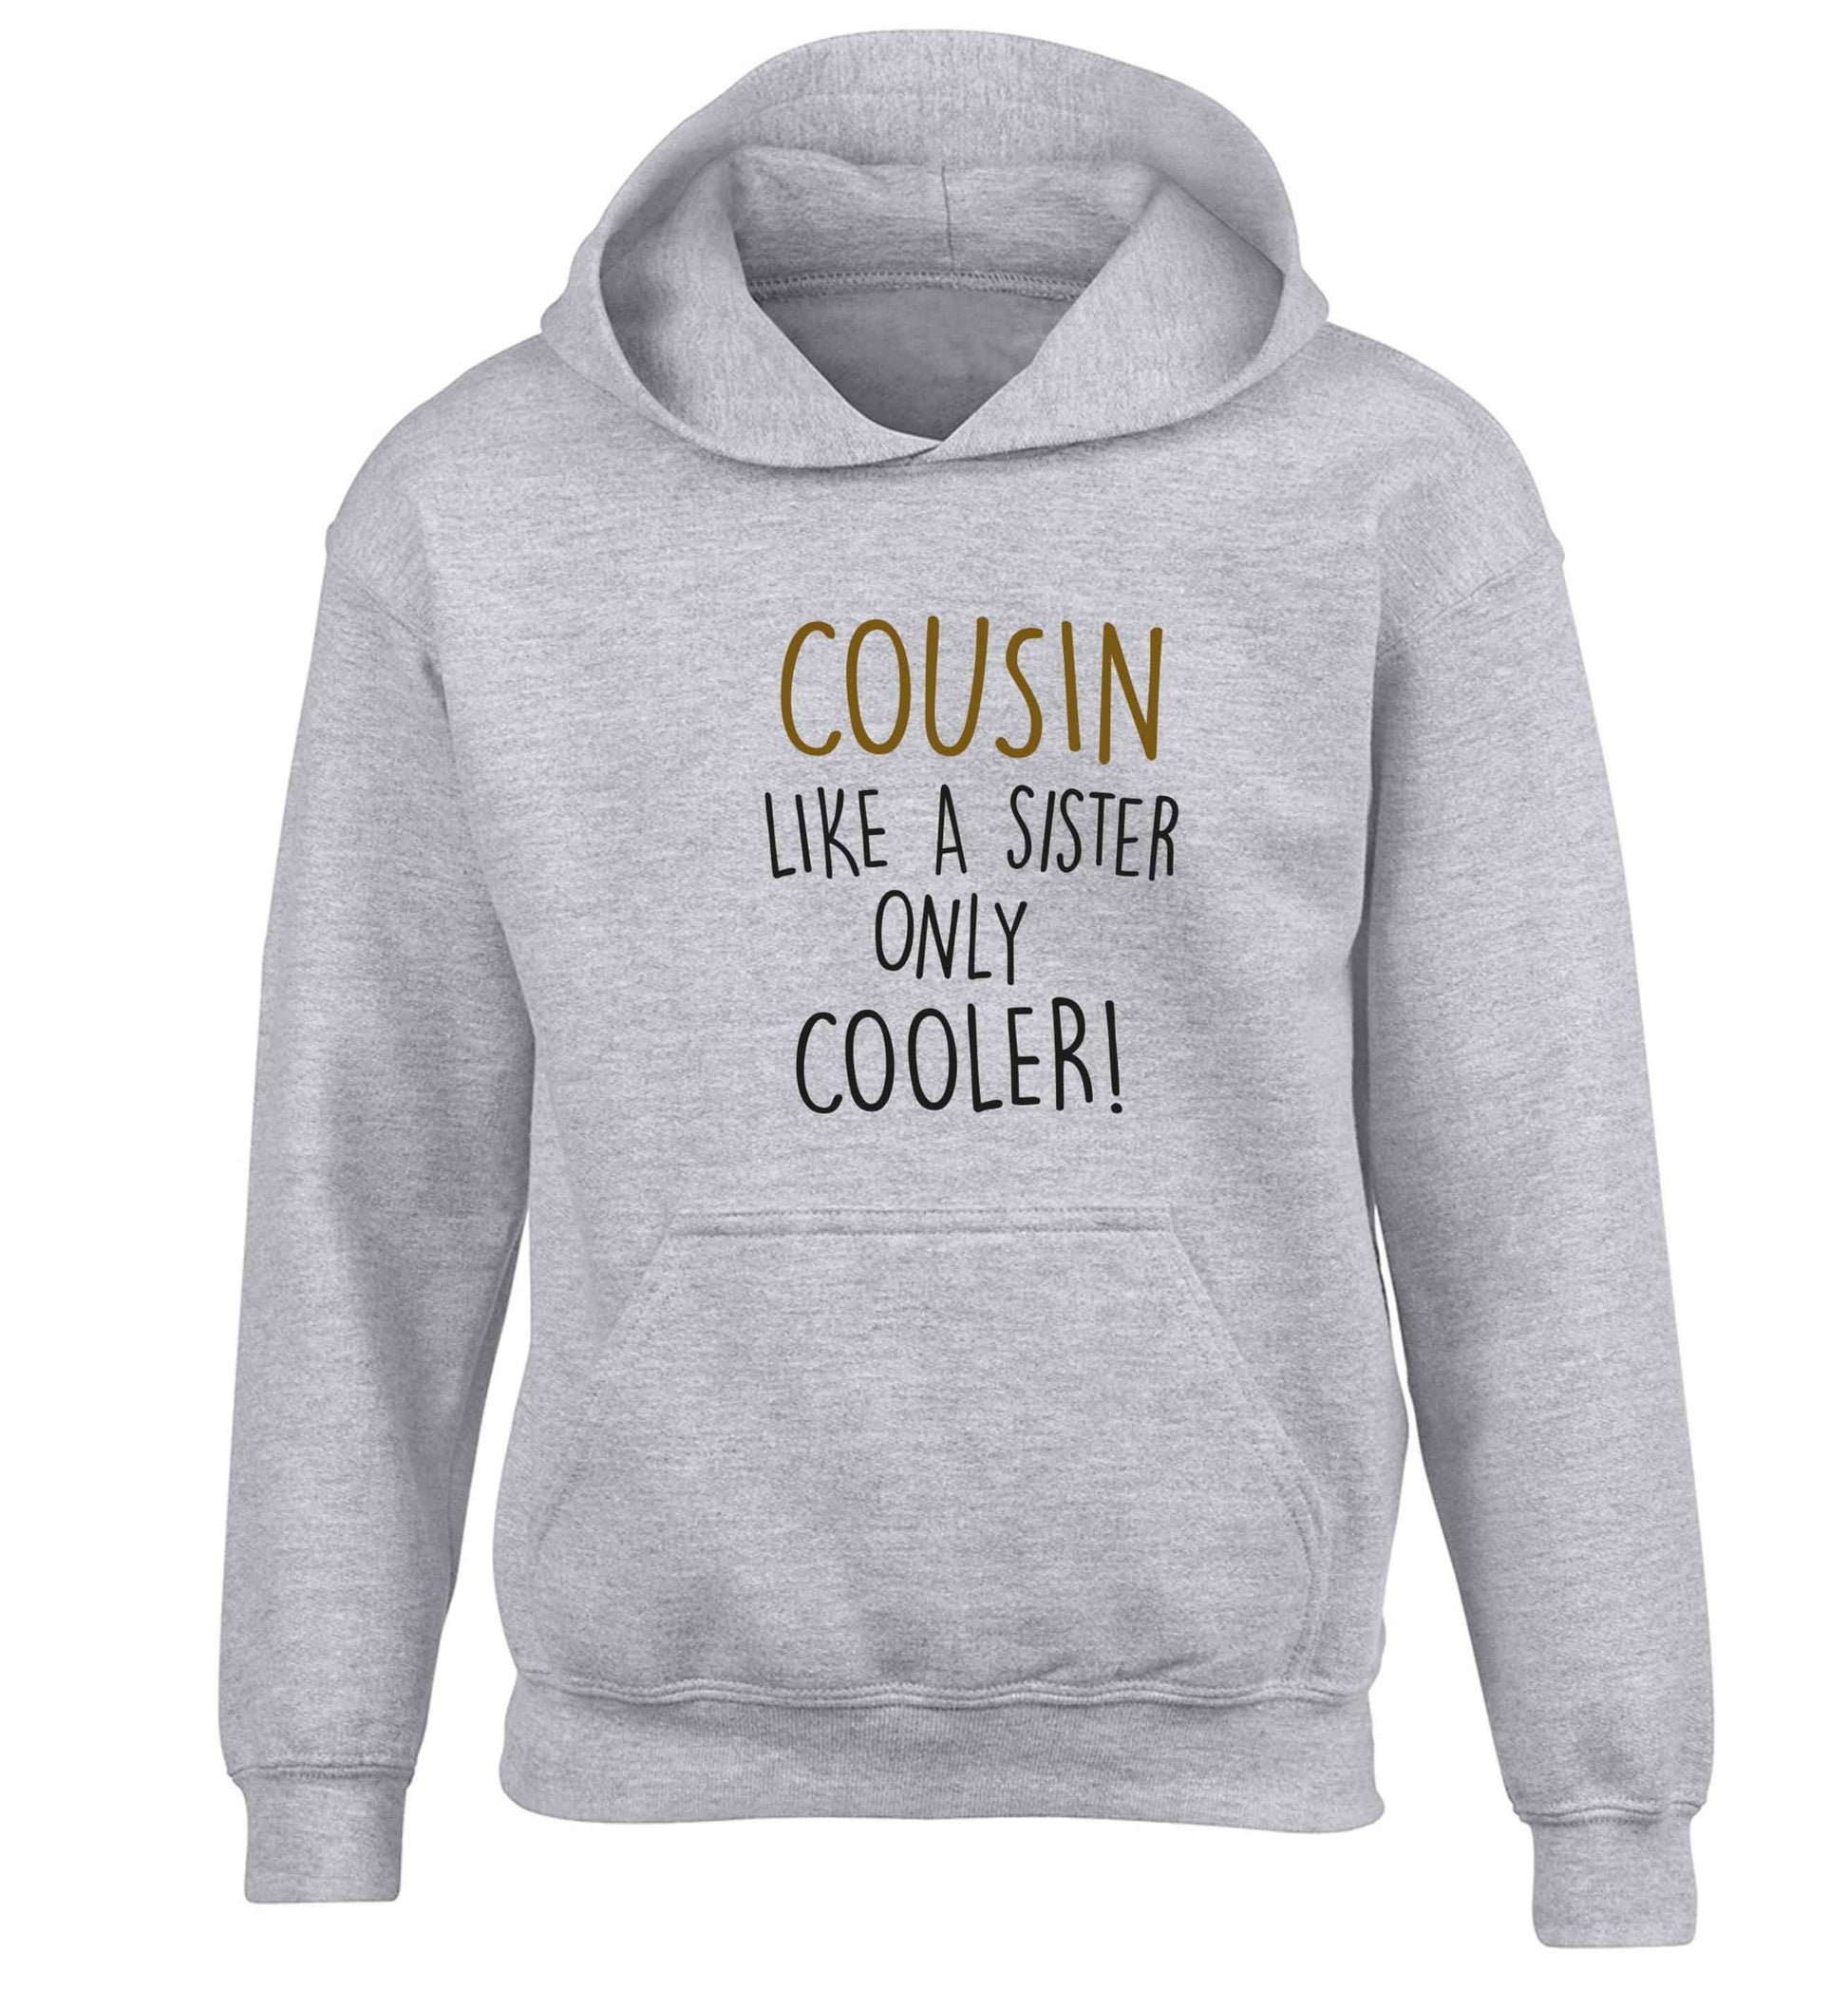 Cousin like a sister only cooler children's grey hoodie 12-13 Years